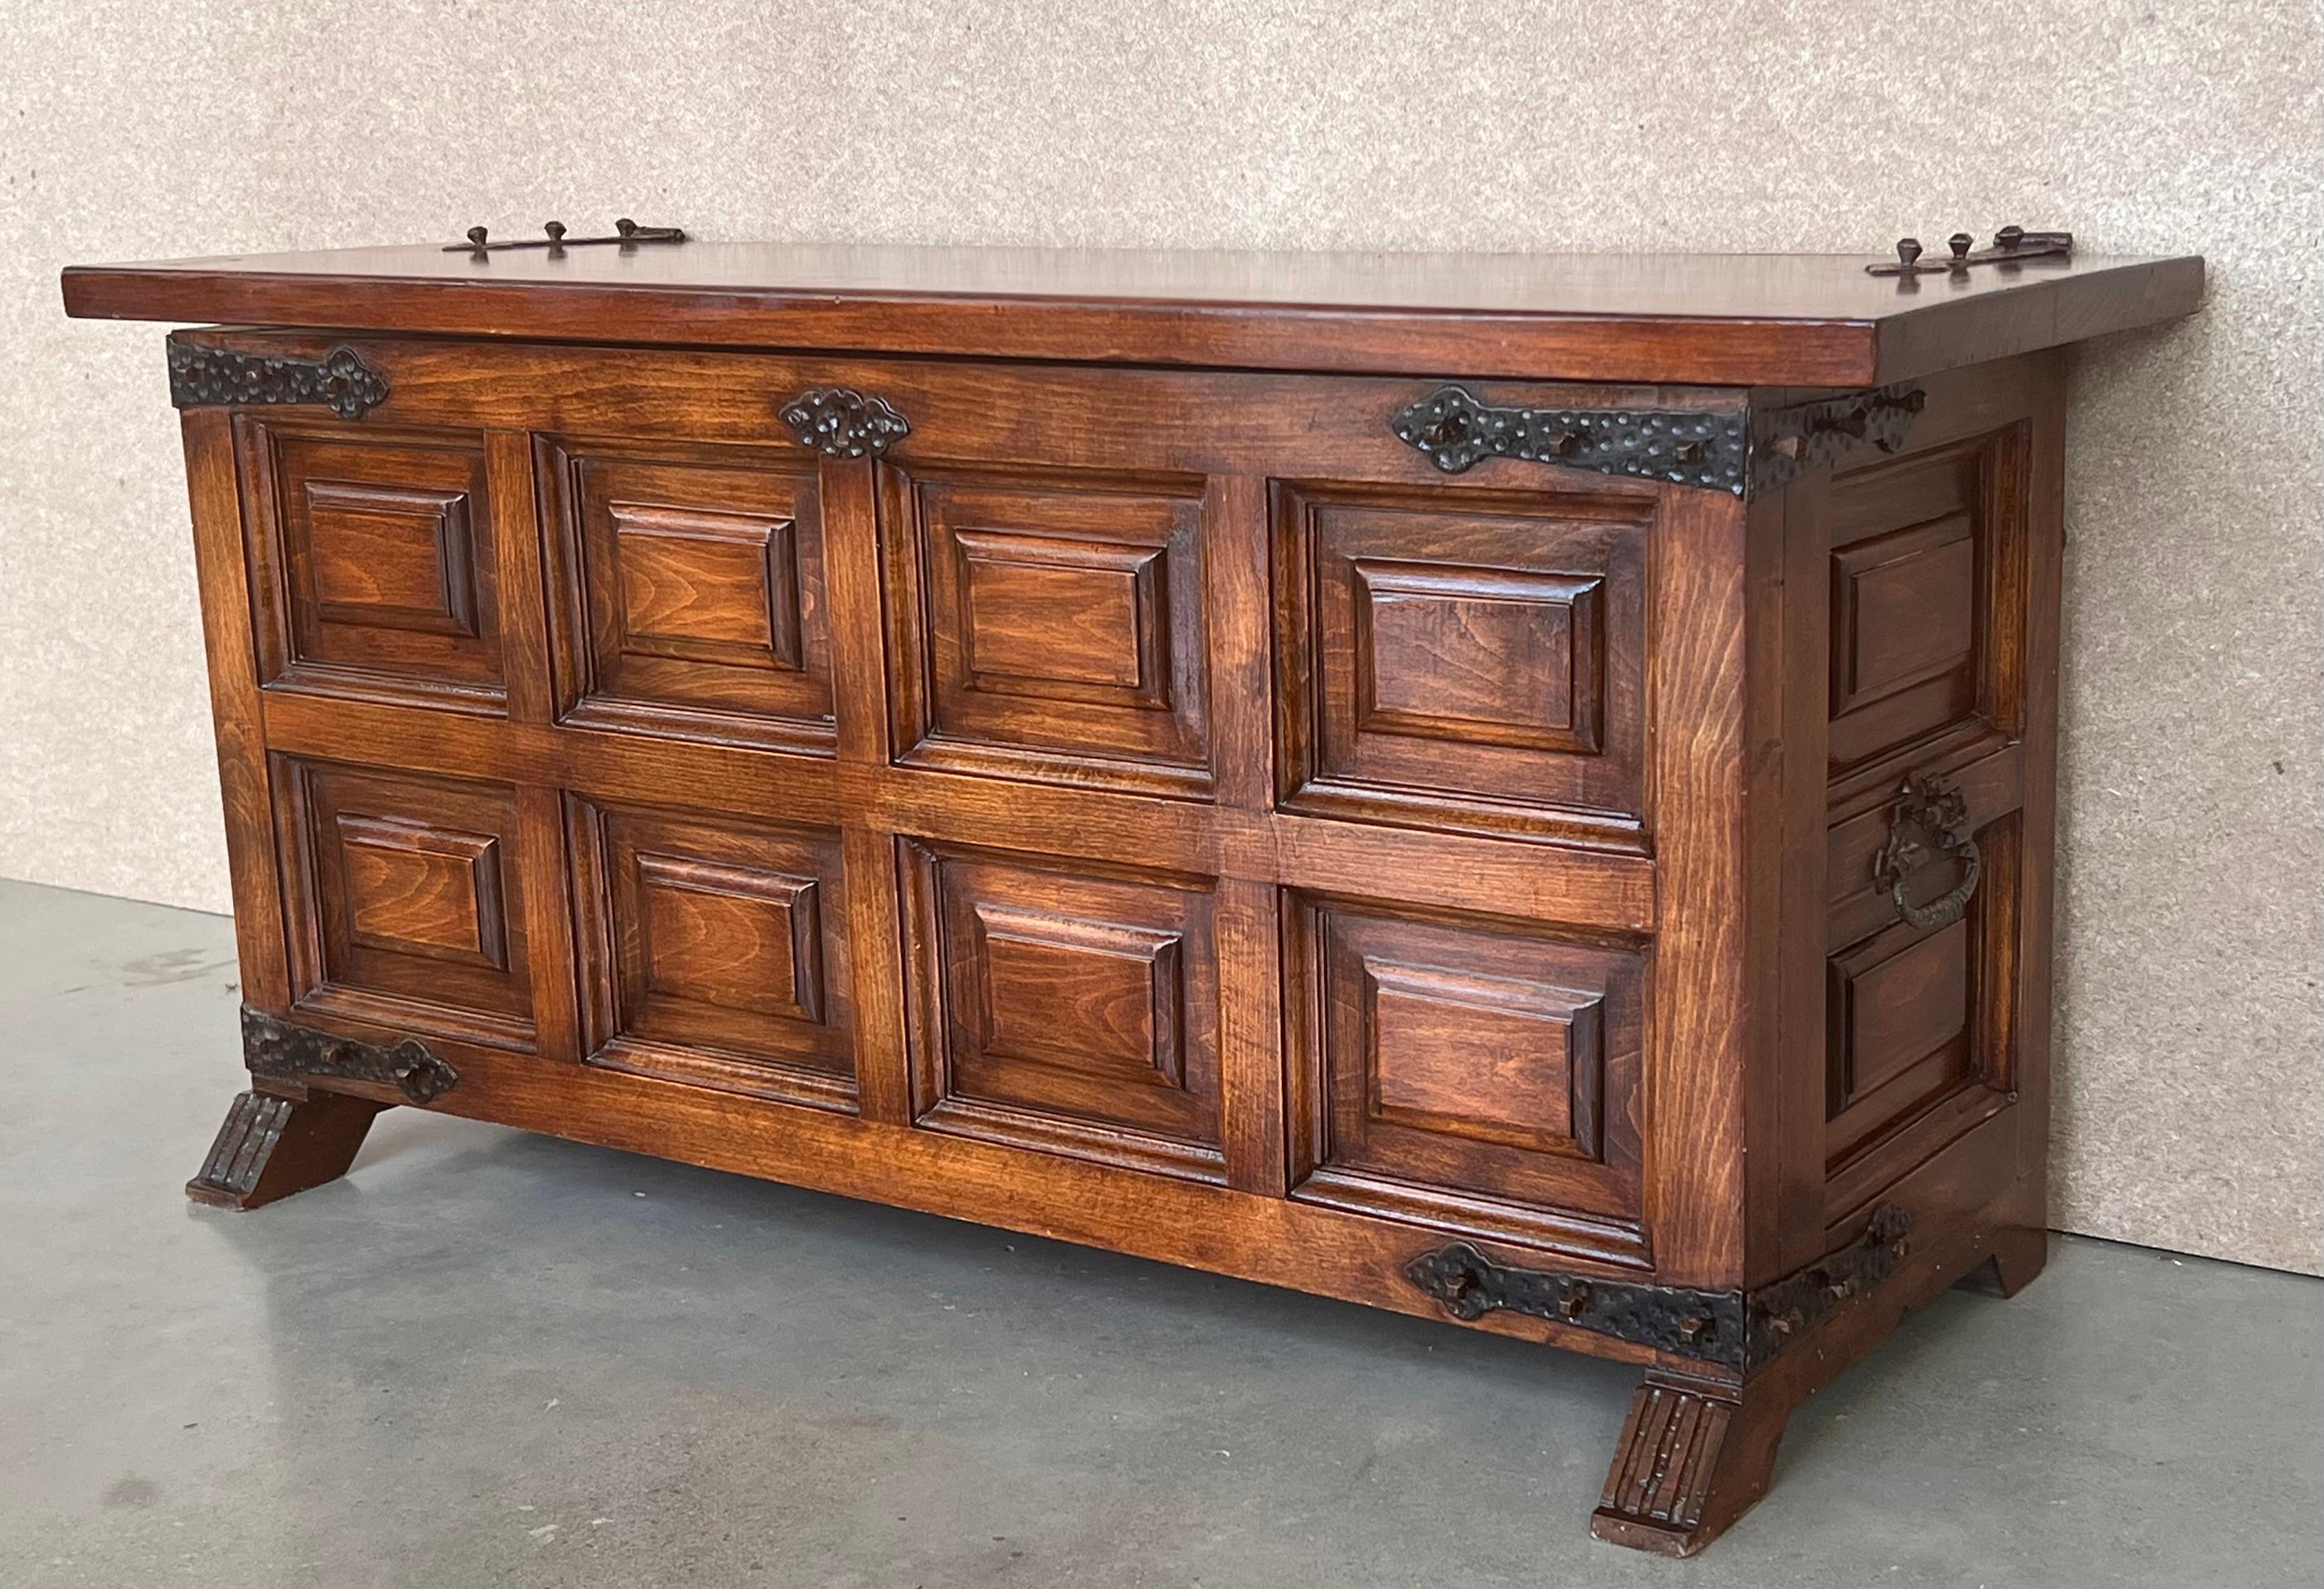 Spanish Colonial 20th Spanish Trunk, Blanket Chest with Raised Wooden Panels and Iron Hardware